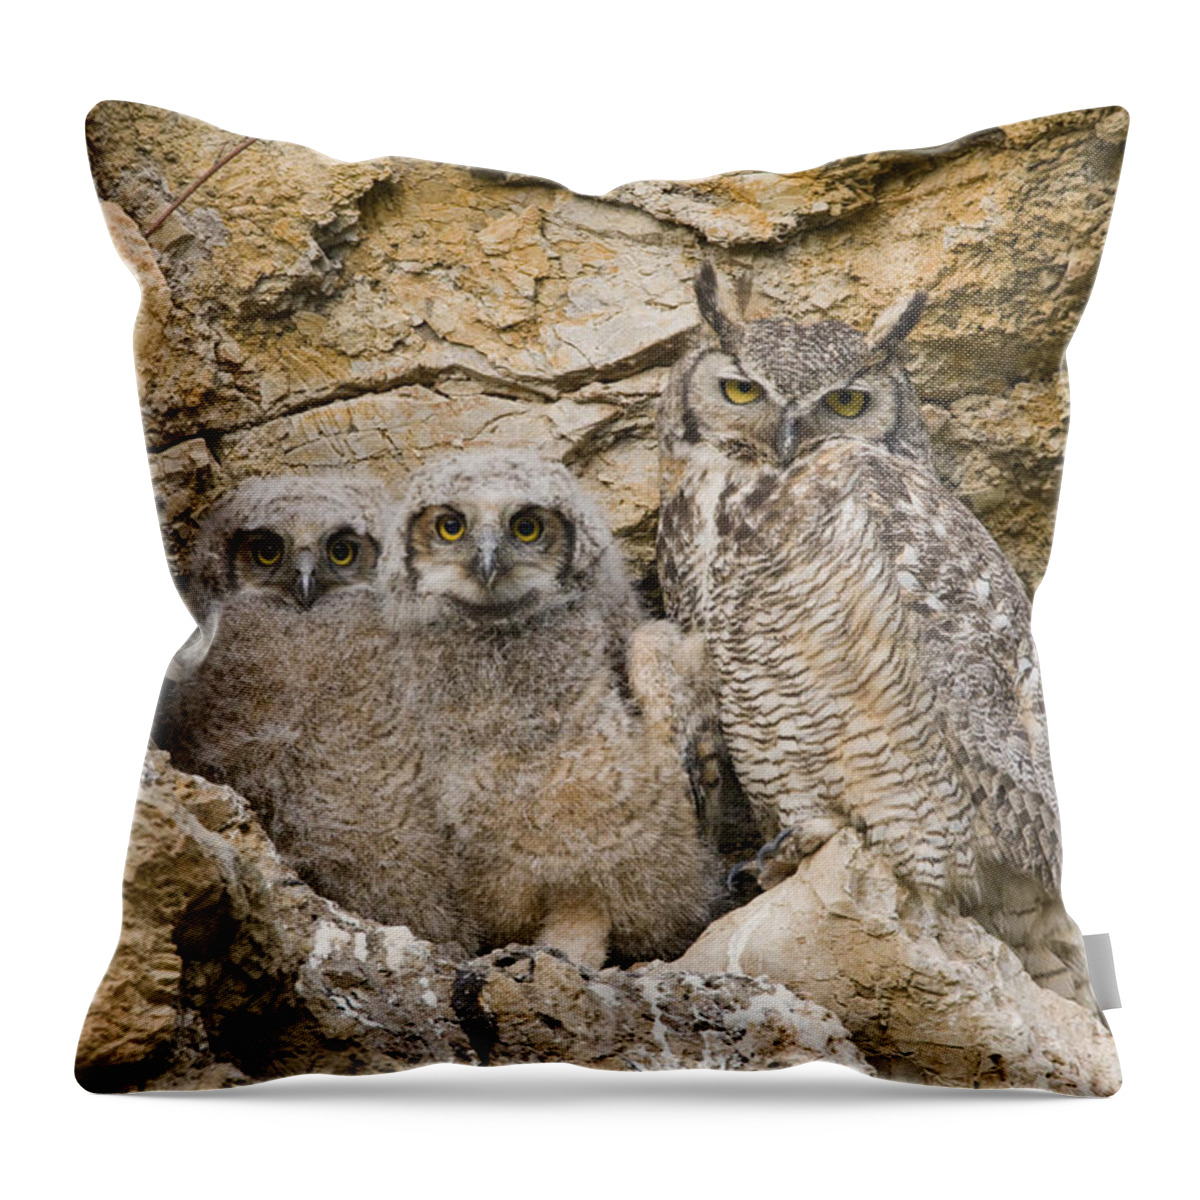 00439316 Throw Pillow featuring the photograph Great Horned Owl With Owlets In Nest by Sebastian Kennerknecht